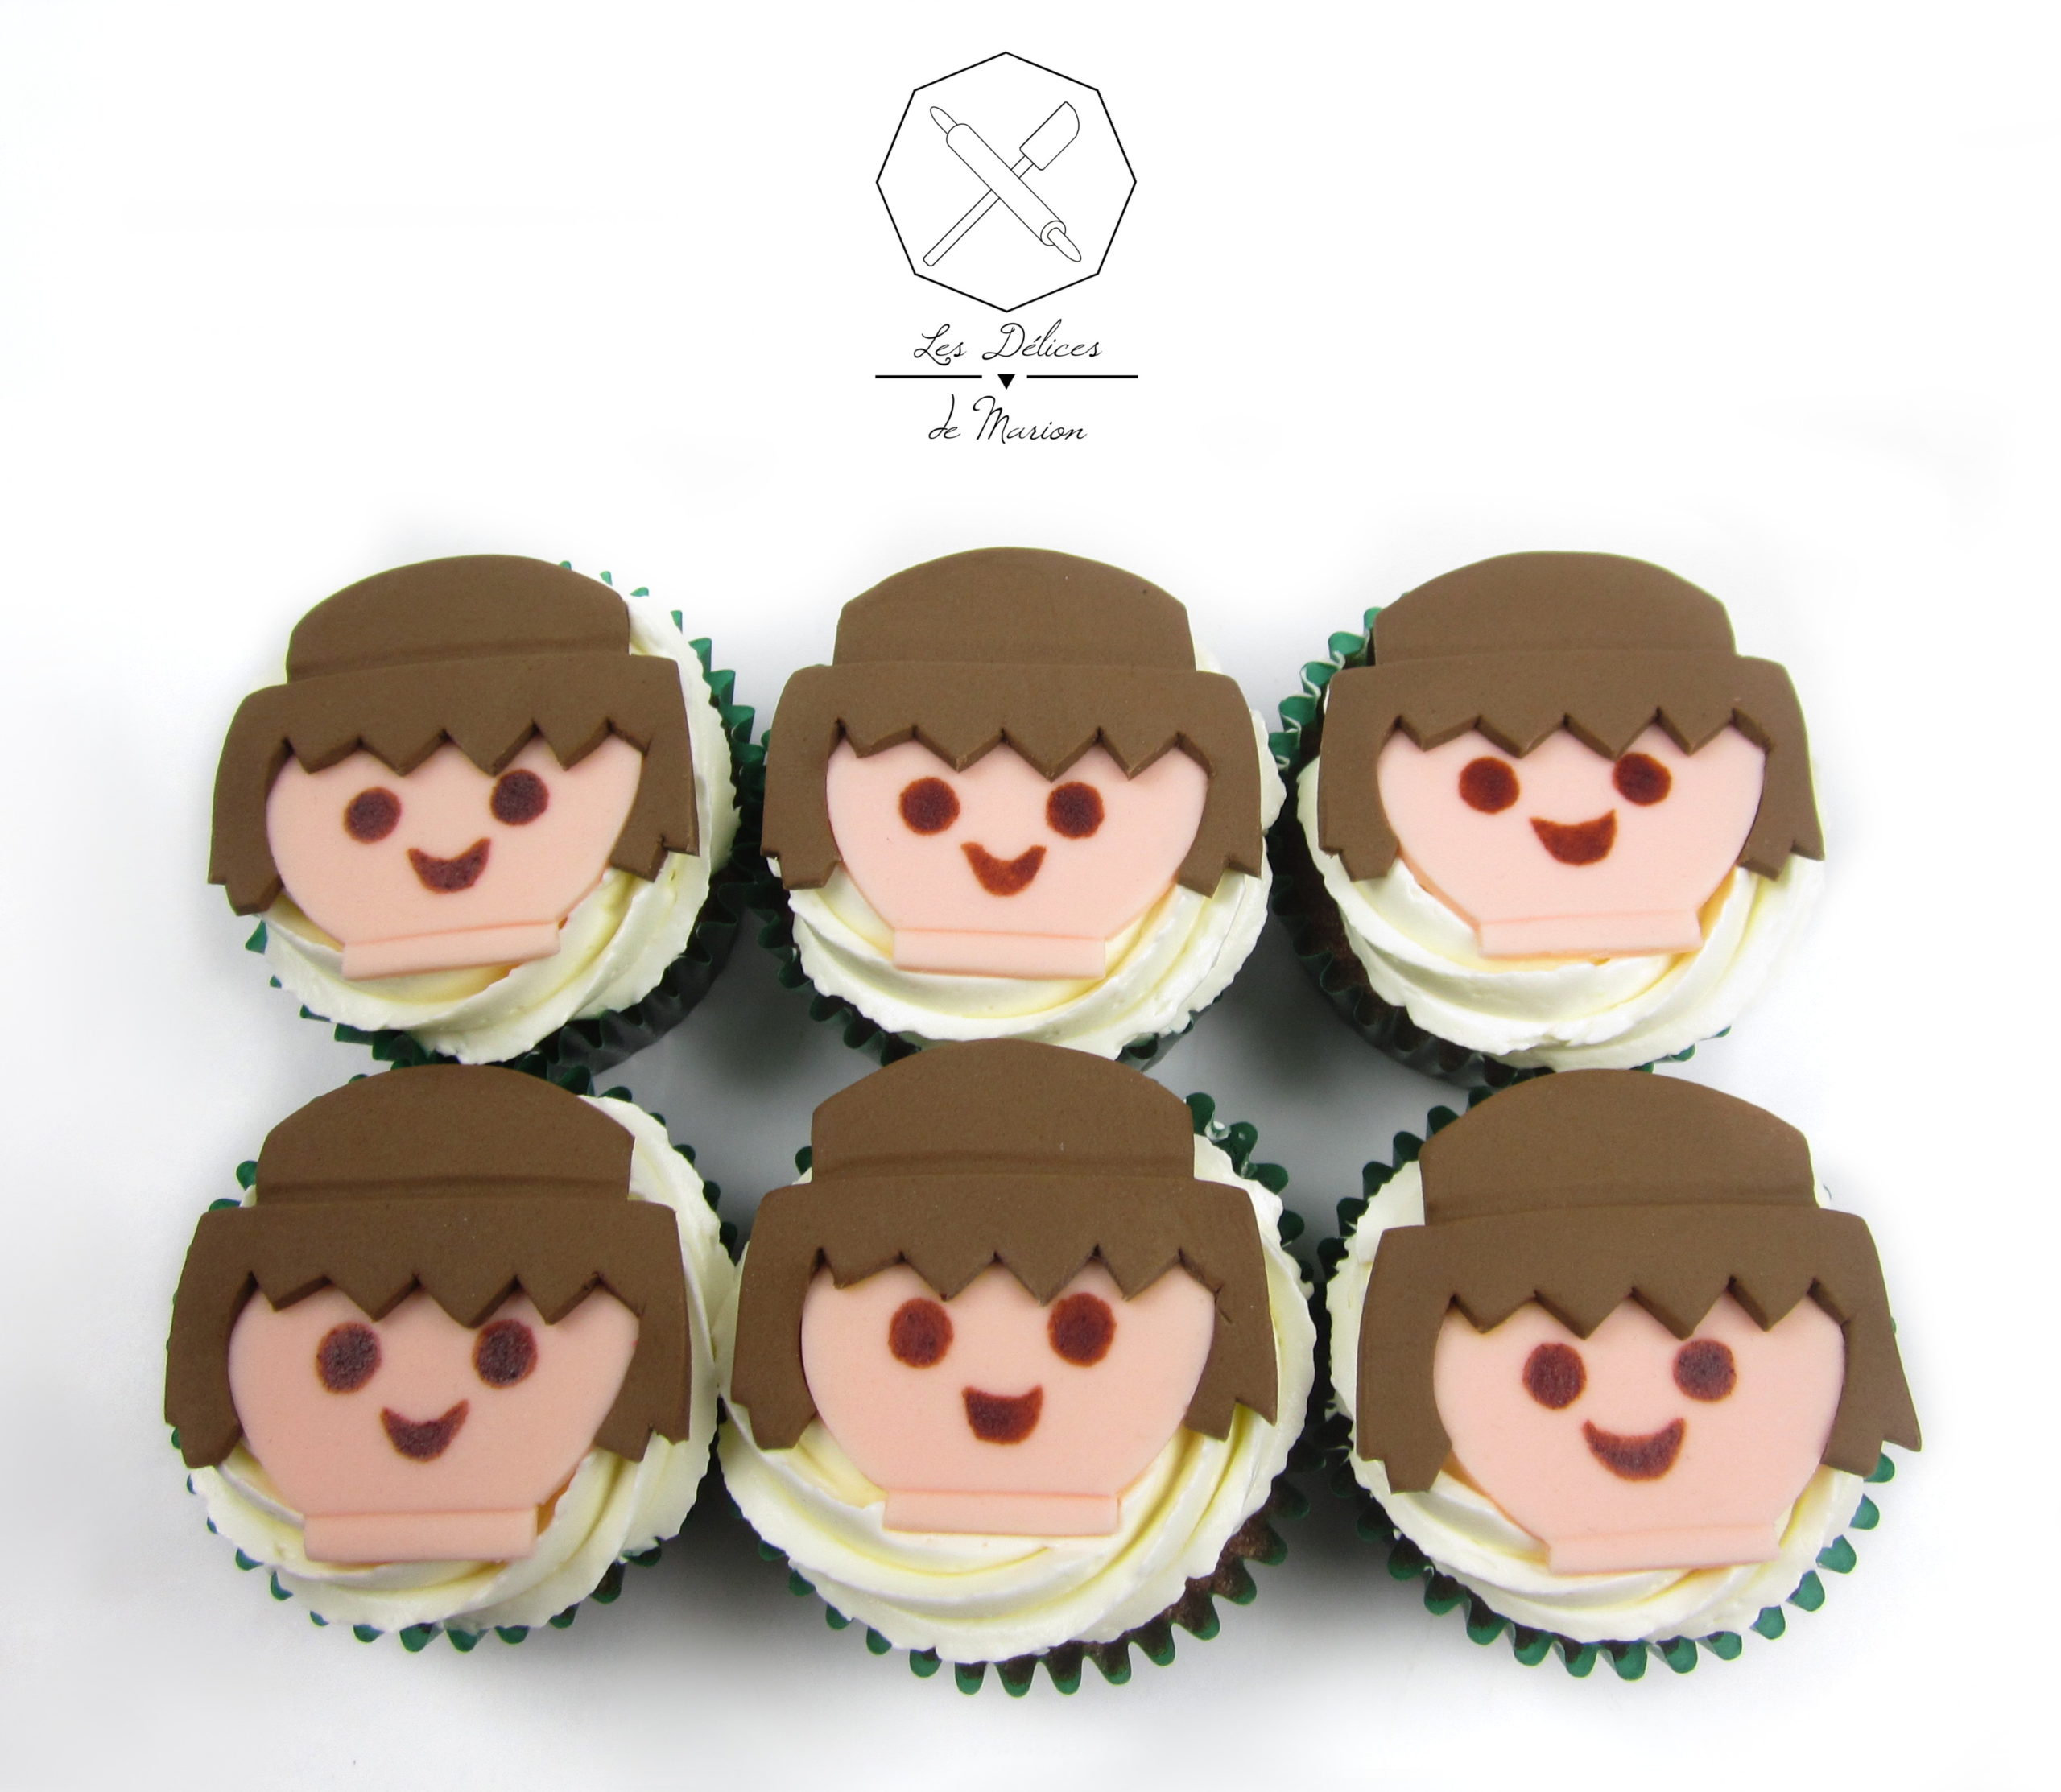 cupcakes_playmobil_cake-design_delices-marion